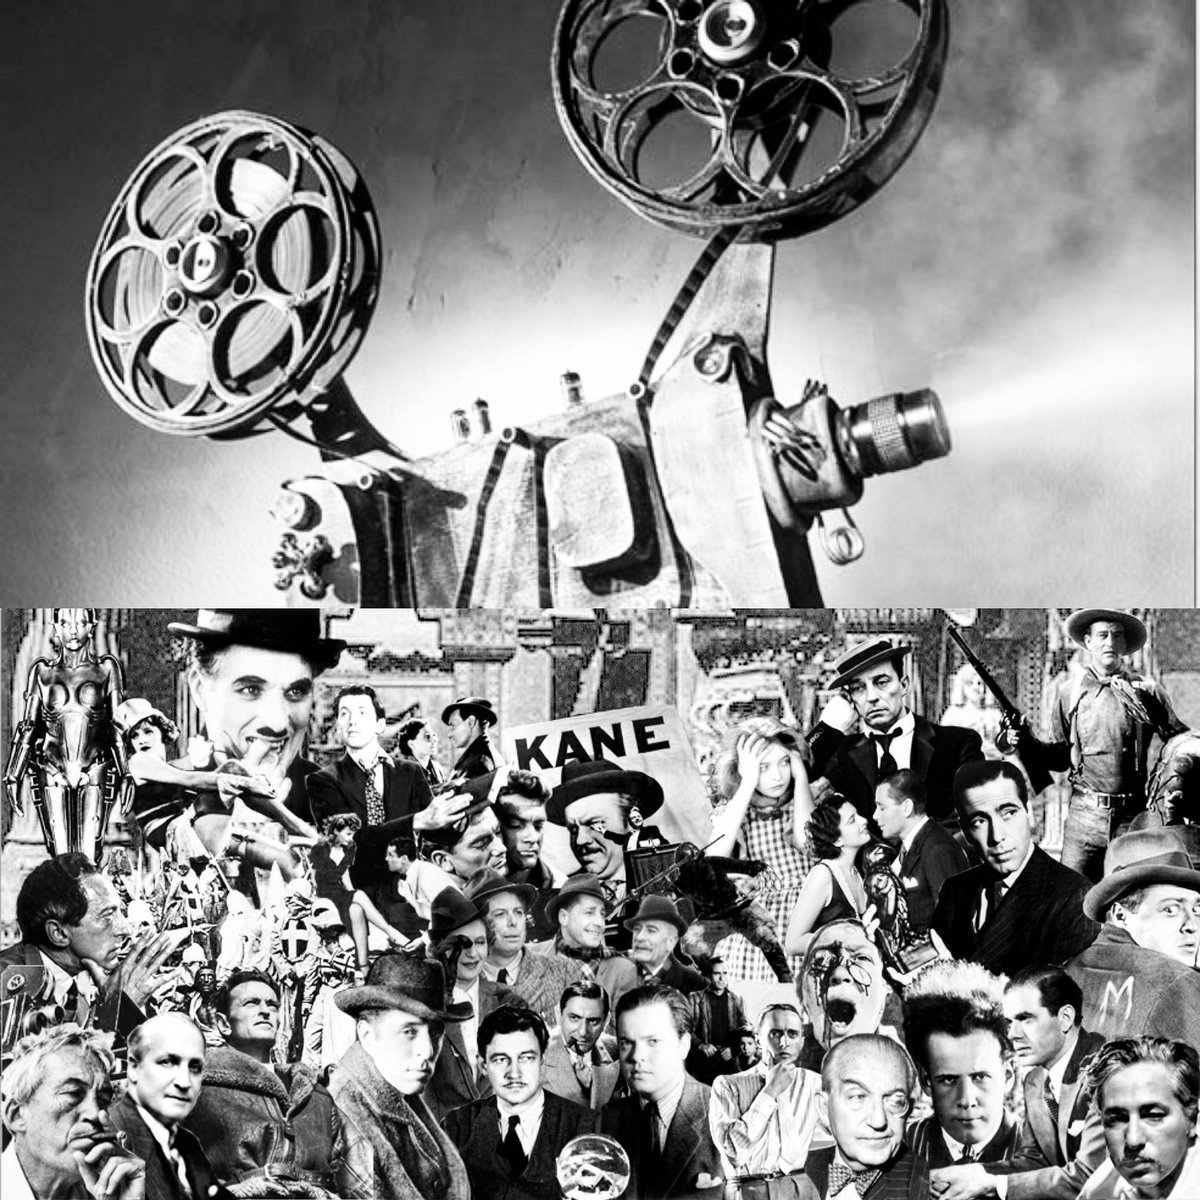 HAPPY BIRTHDAY CINEMA! Today marks the anniversary of the birth of cinema. The Lumiere Brothers presented the first public screening of motion pictures at the Salon Indien du Grand Cafe in Paris. Vive le cinema! #HappyBirthdayCinema